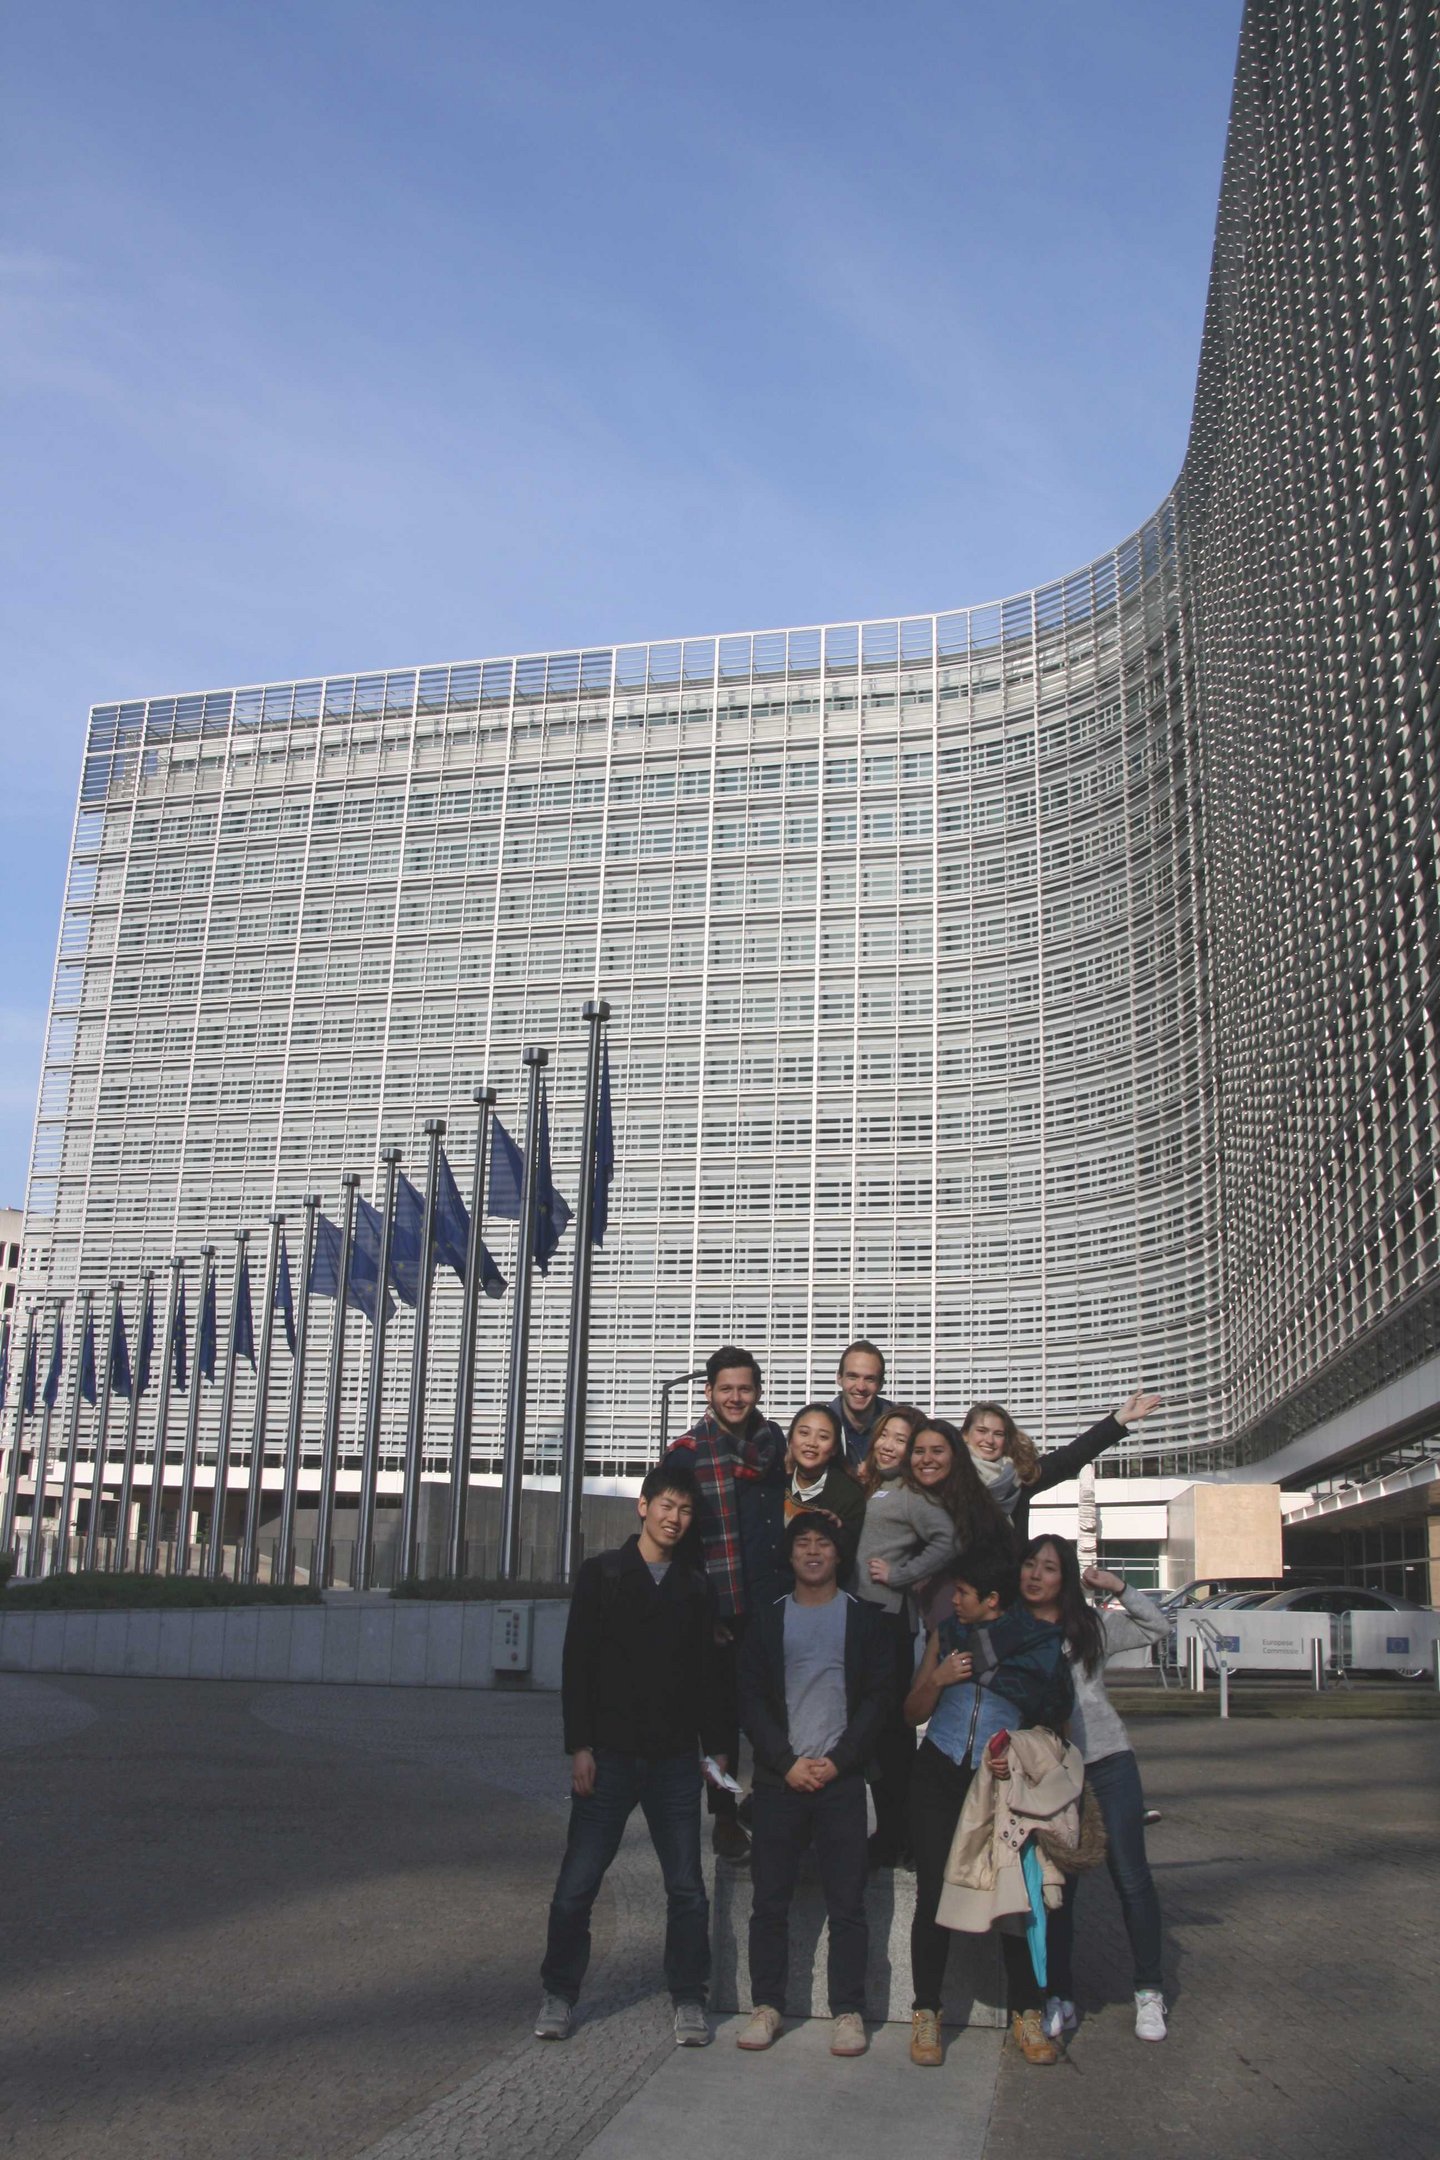 Group picture in front of the EU Parliament